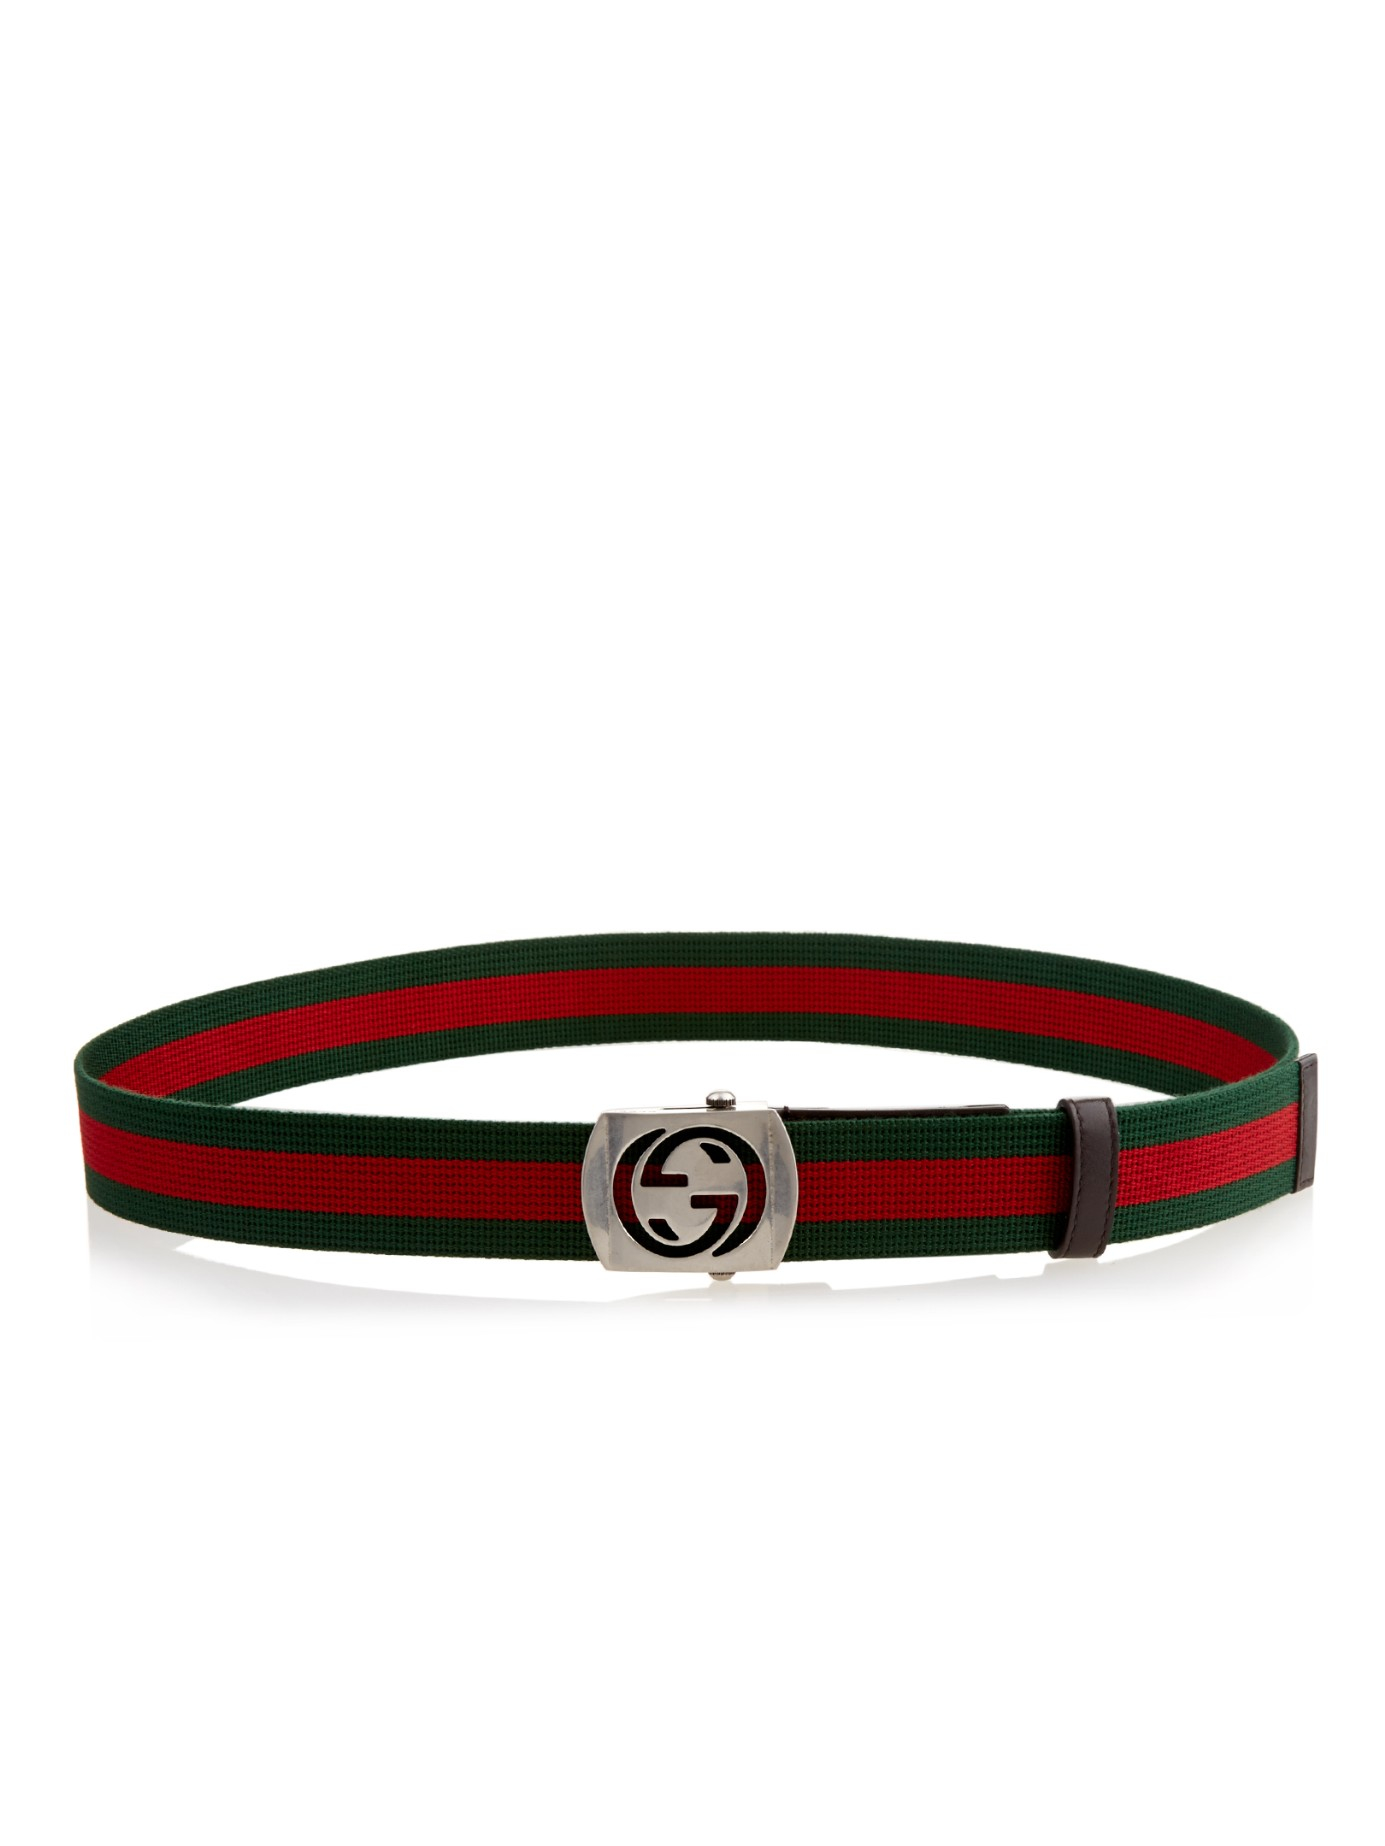 Lyst - Gucci Gg-buckle Canvas Belt in Red for Men